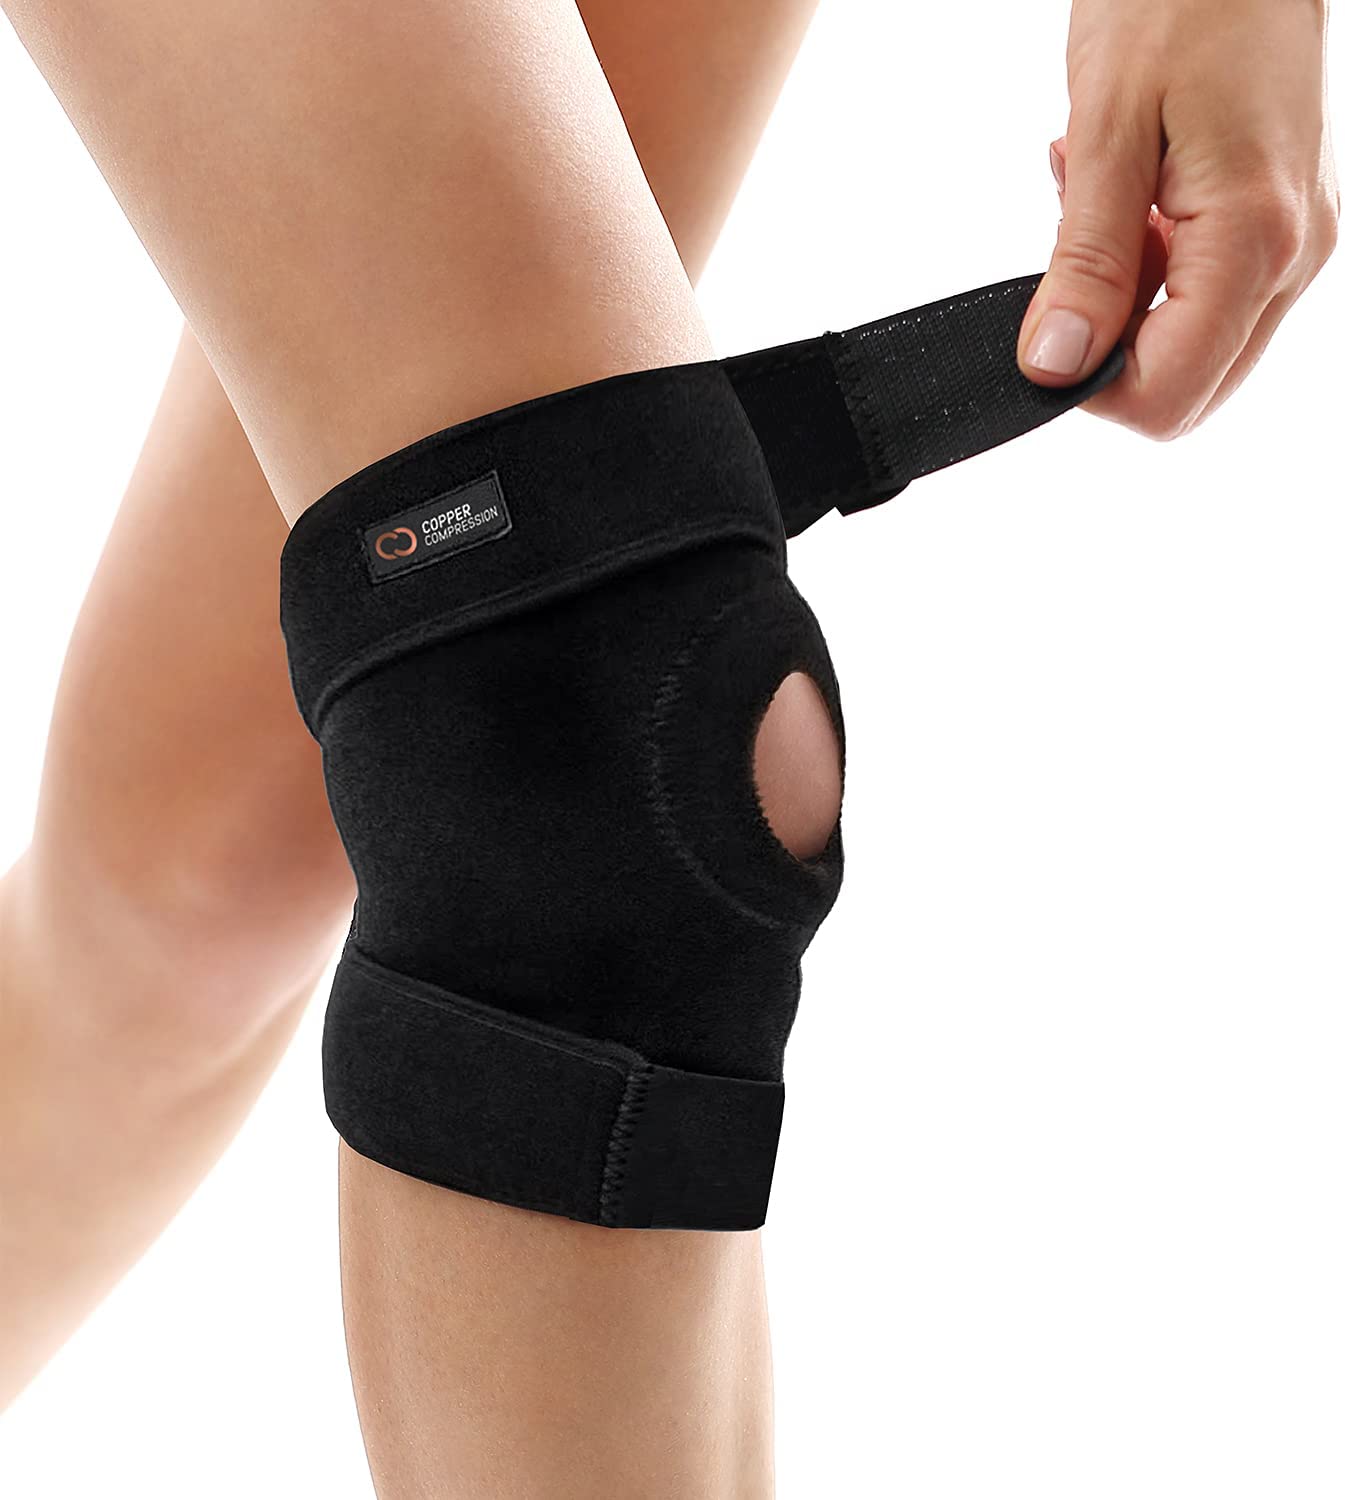 Review of Copper Compression Extra Support Knee Brace